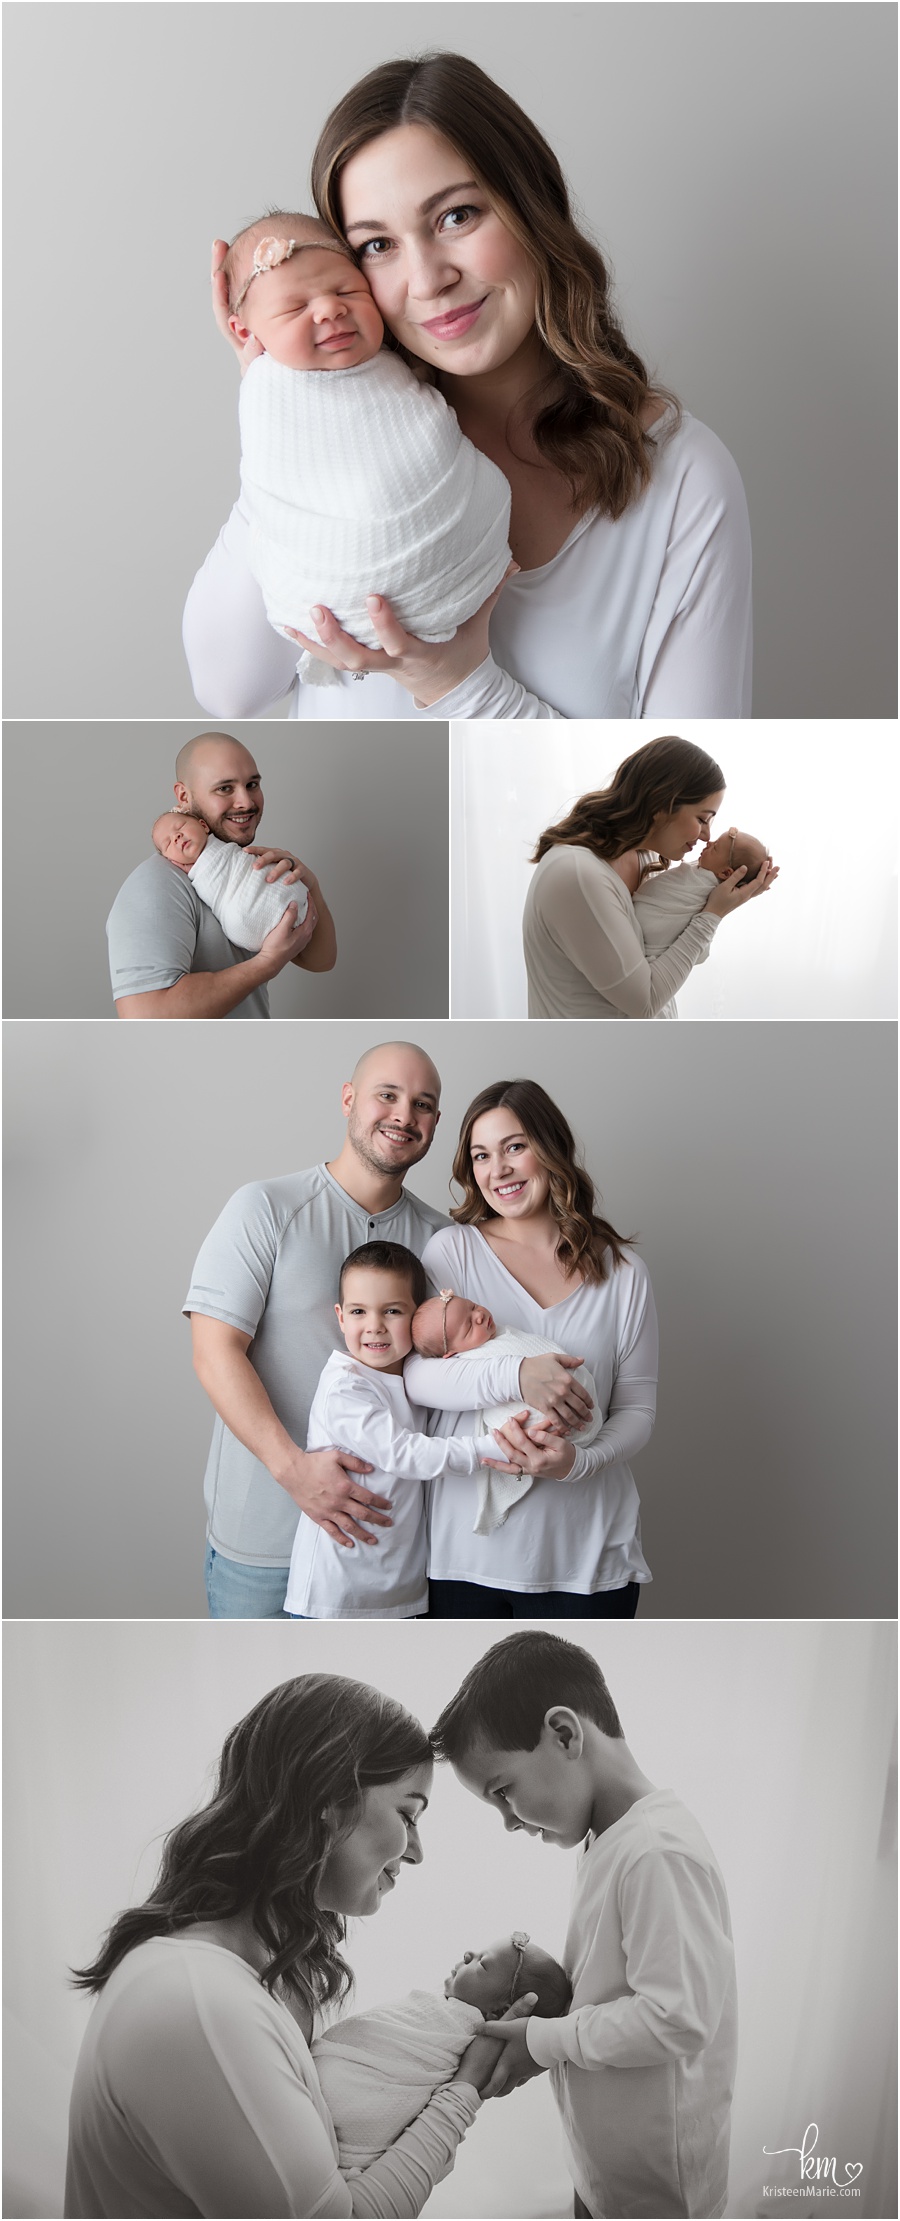 family with newborn baby and other brother all in white